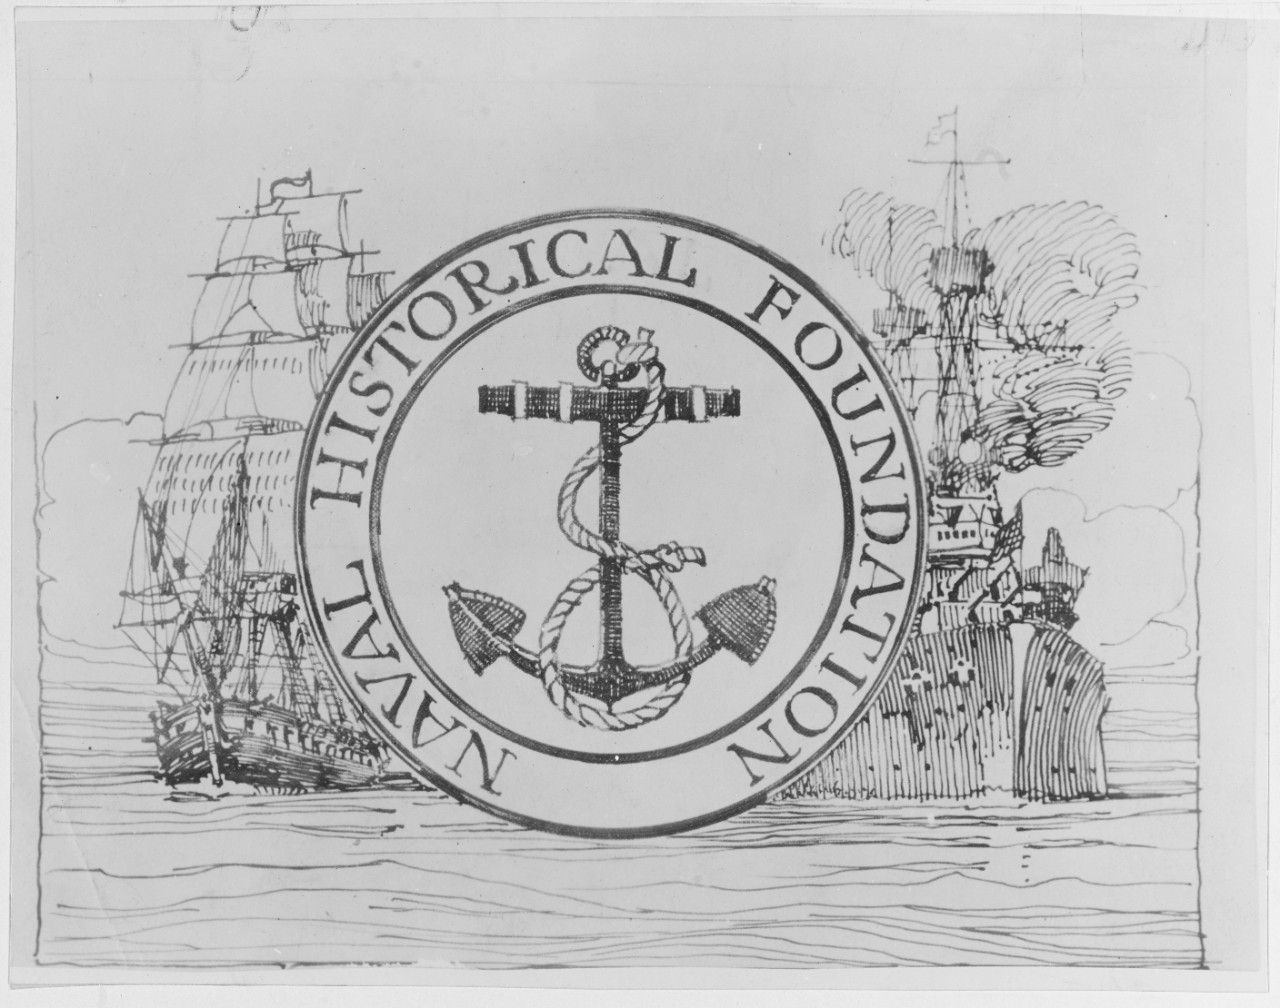 Seal of Naval Historical Foundation